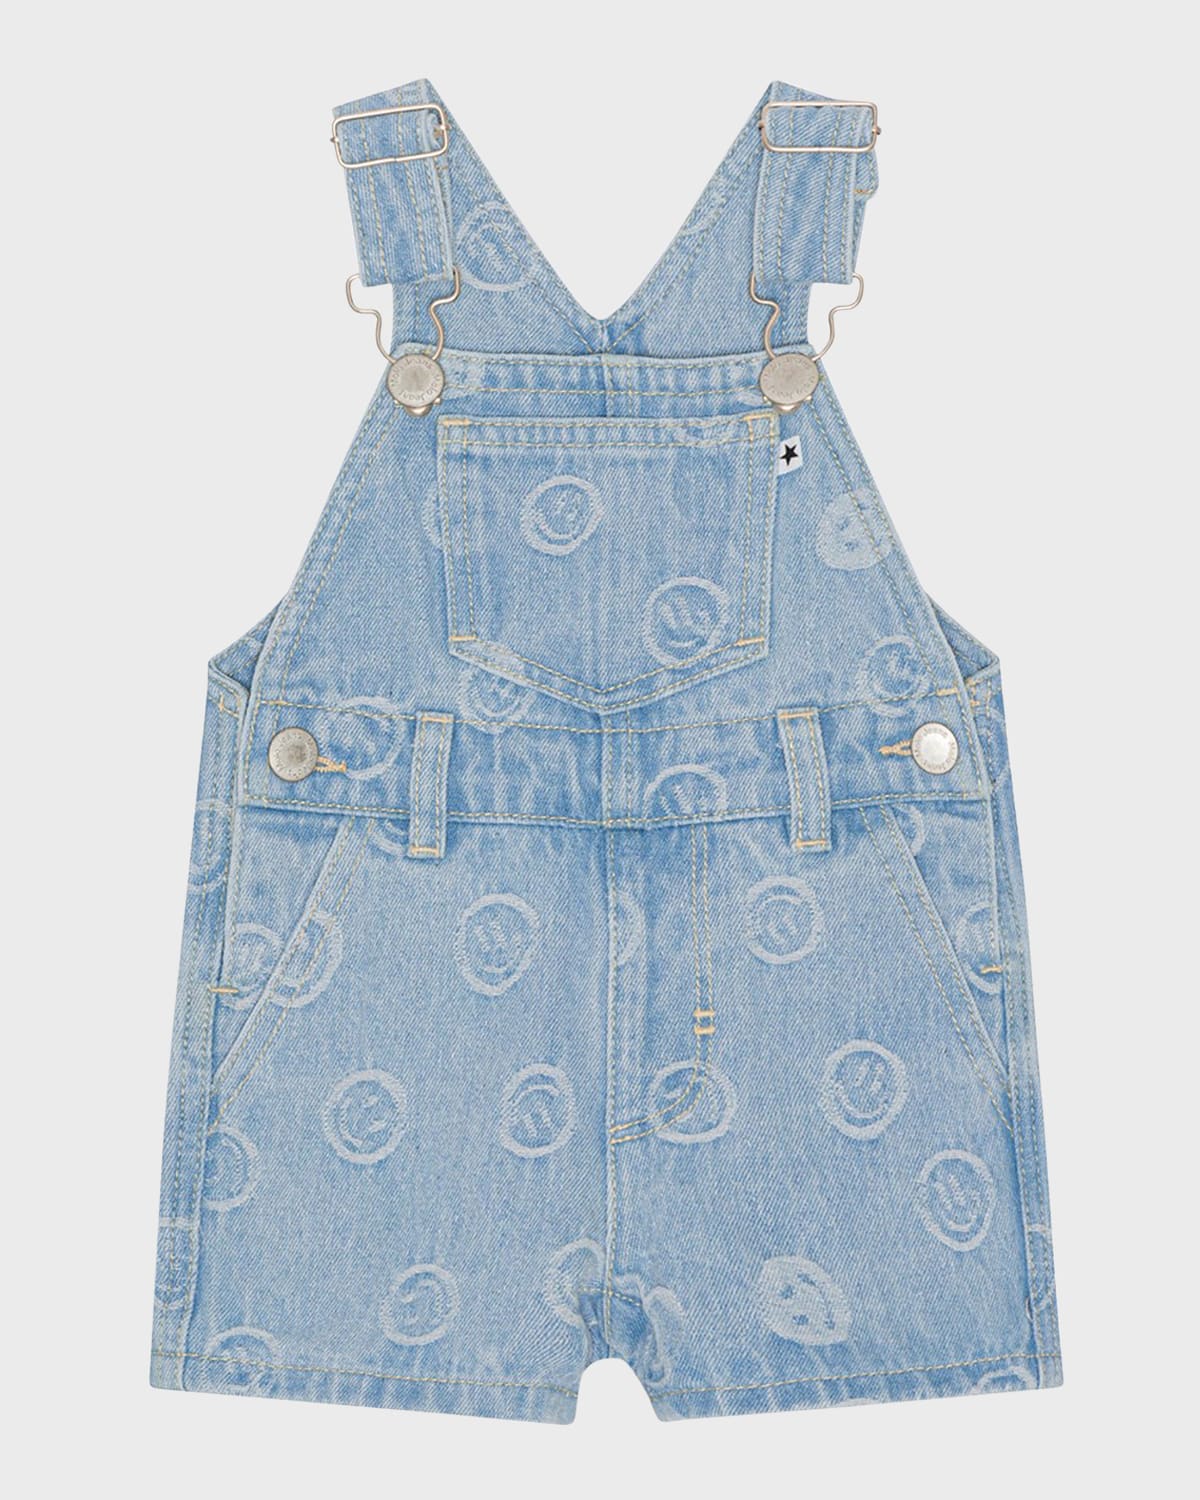 Kid's Spot Happy Face Printed Overalls, Size 9M-3